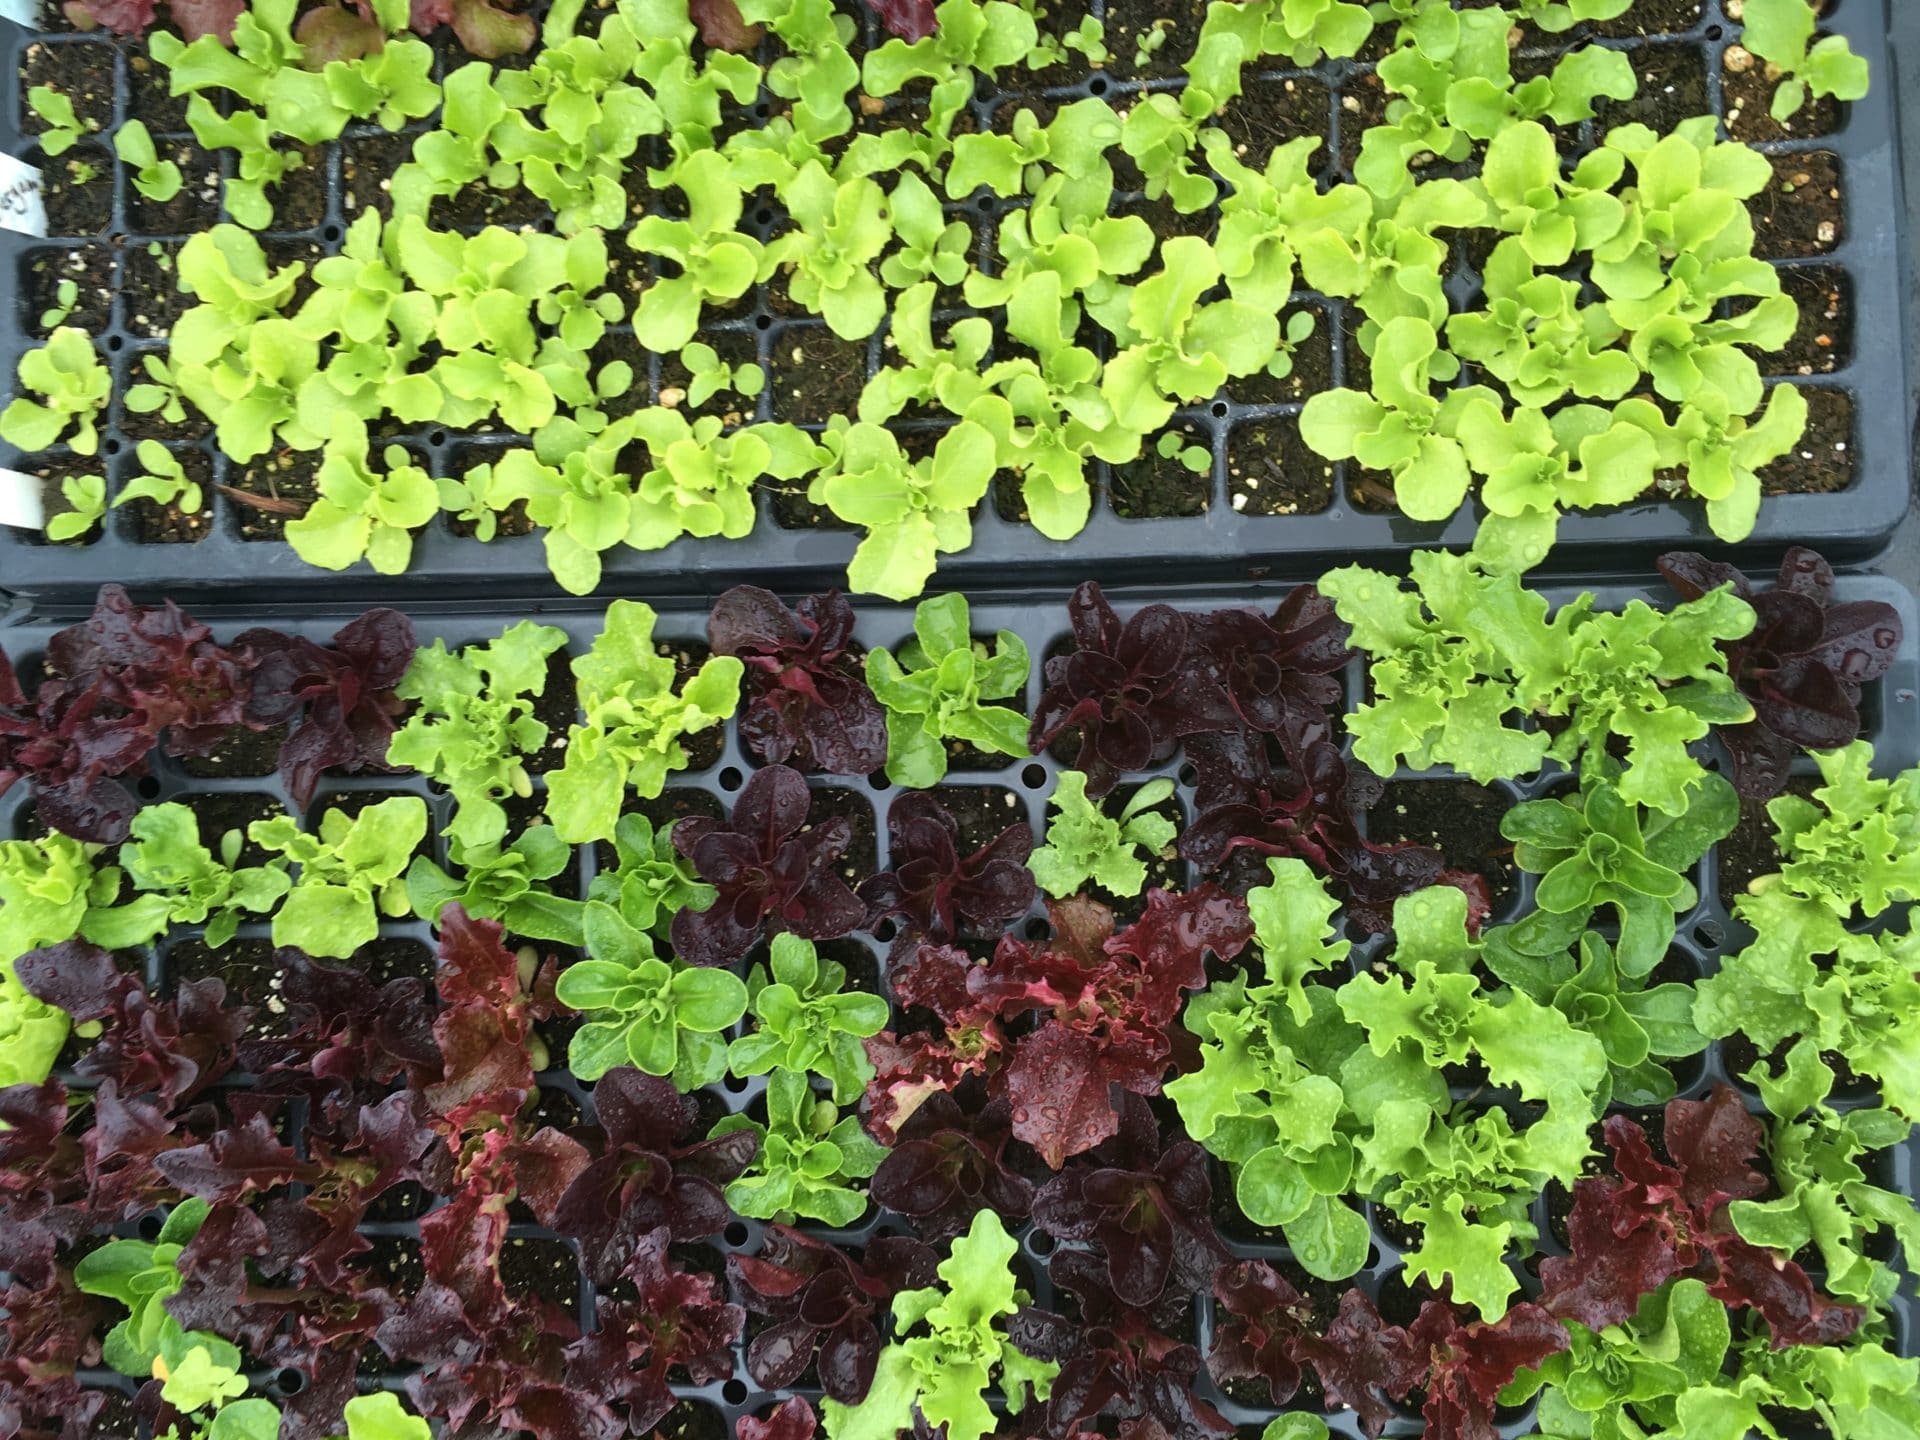 Trays of greens in the greenhouse, May 1 2019